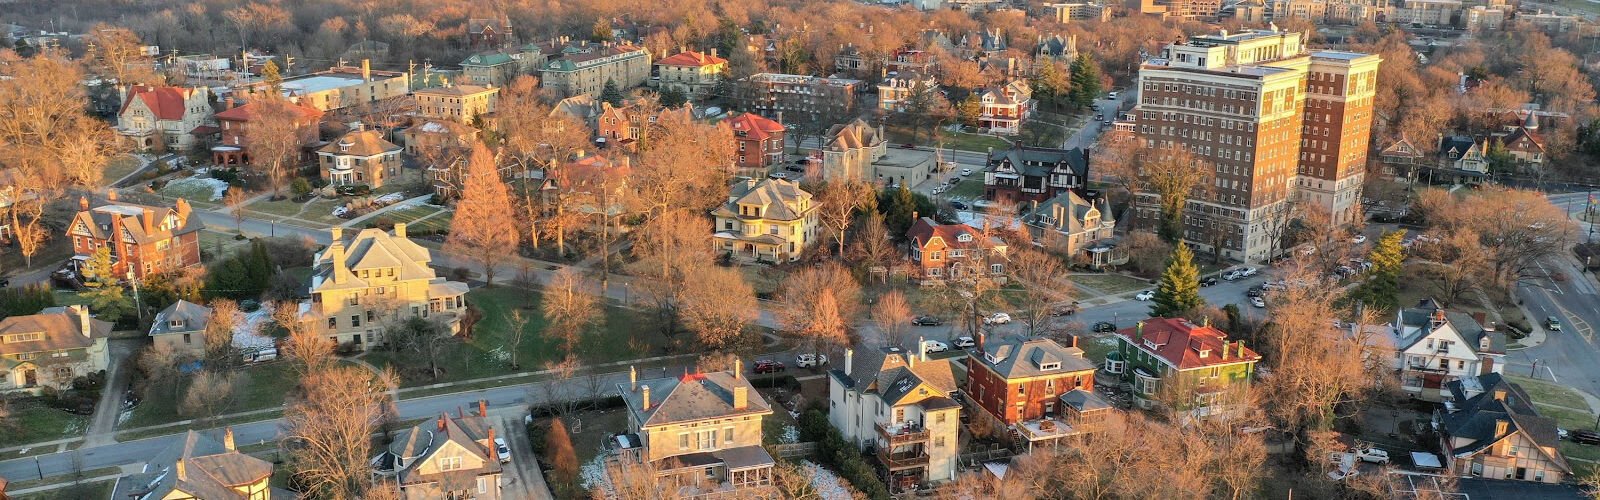 Connected Communities proposes to remove the single-family housing zoning protections within ½ mile on both sides of the Reading Road BRT corridor.